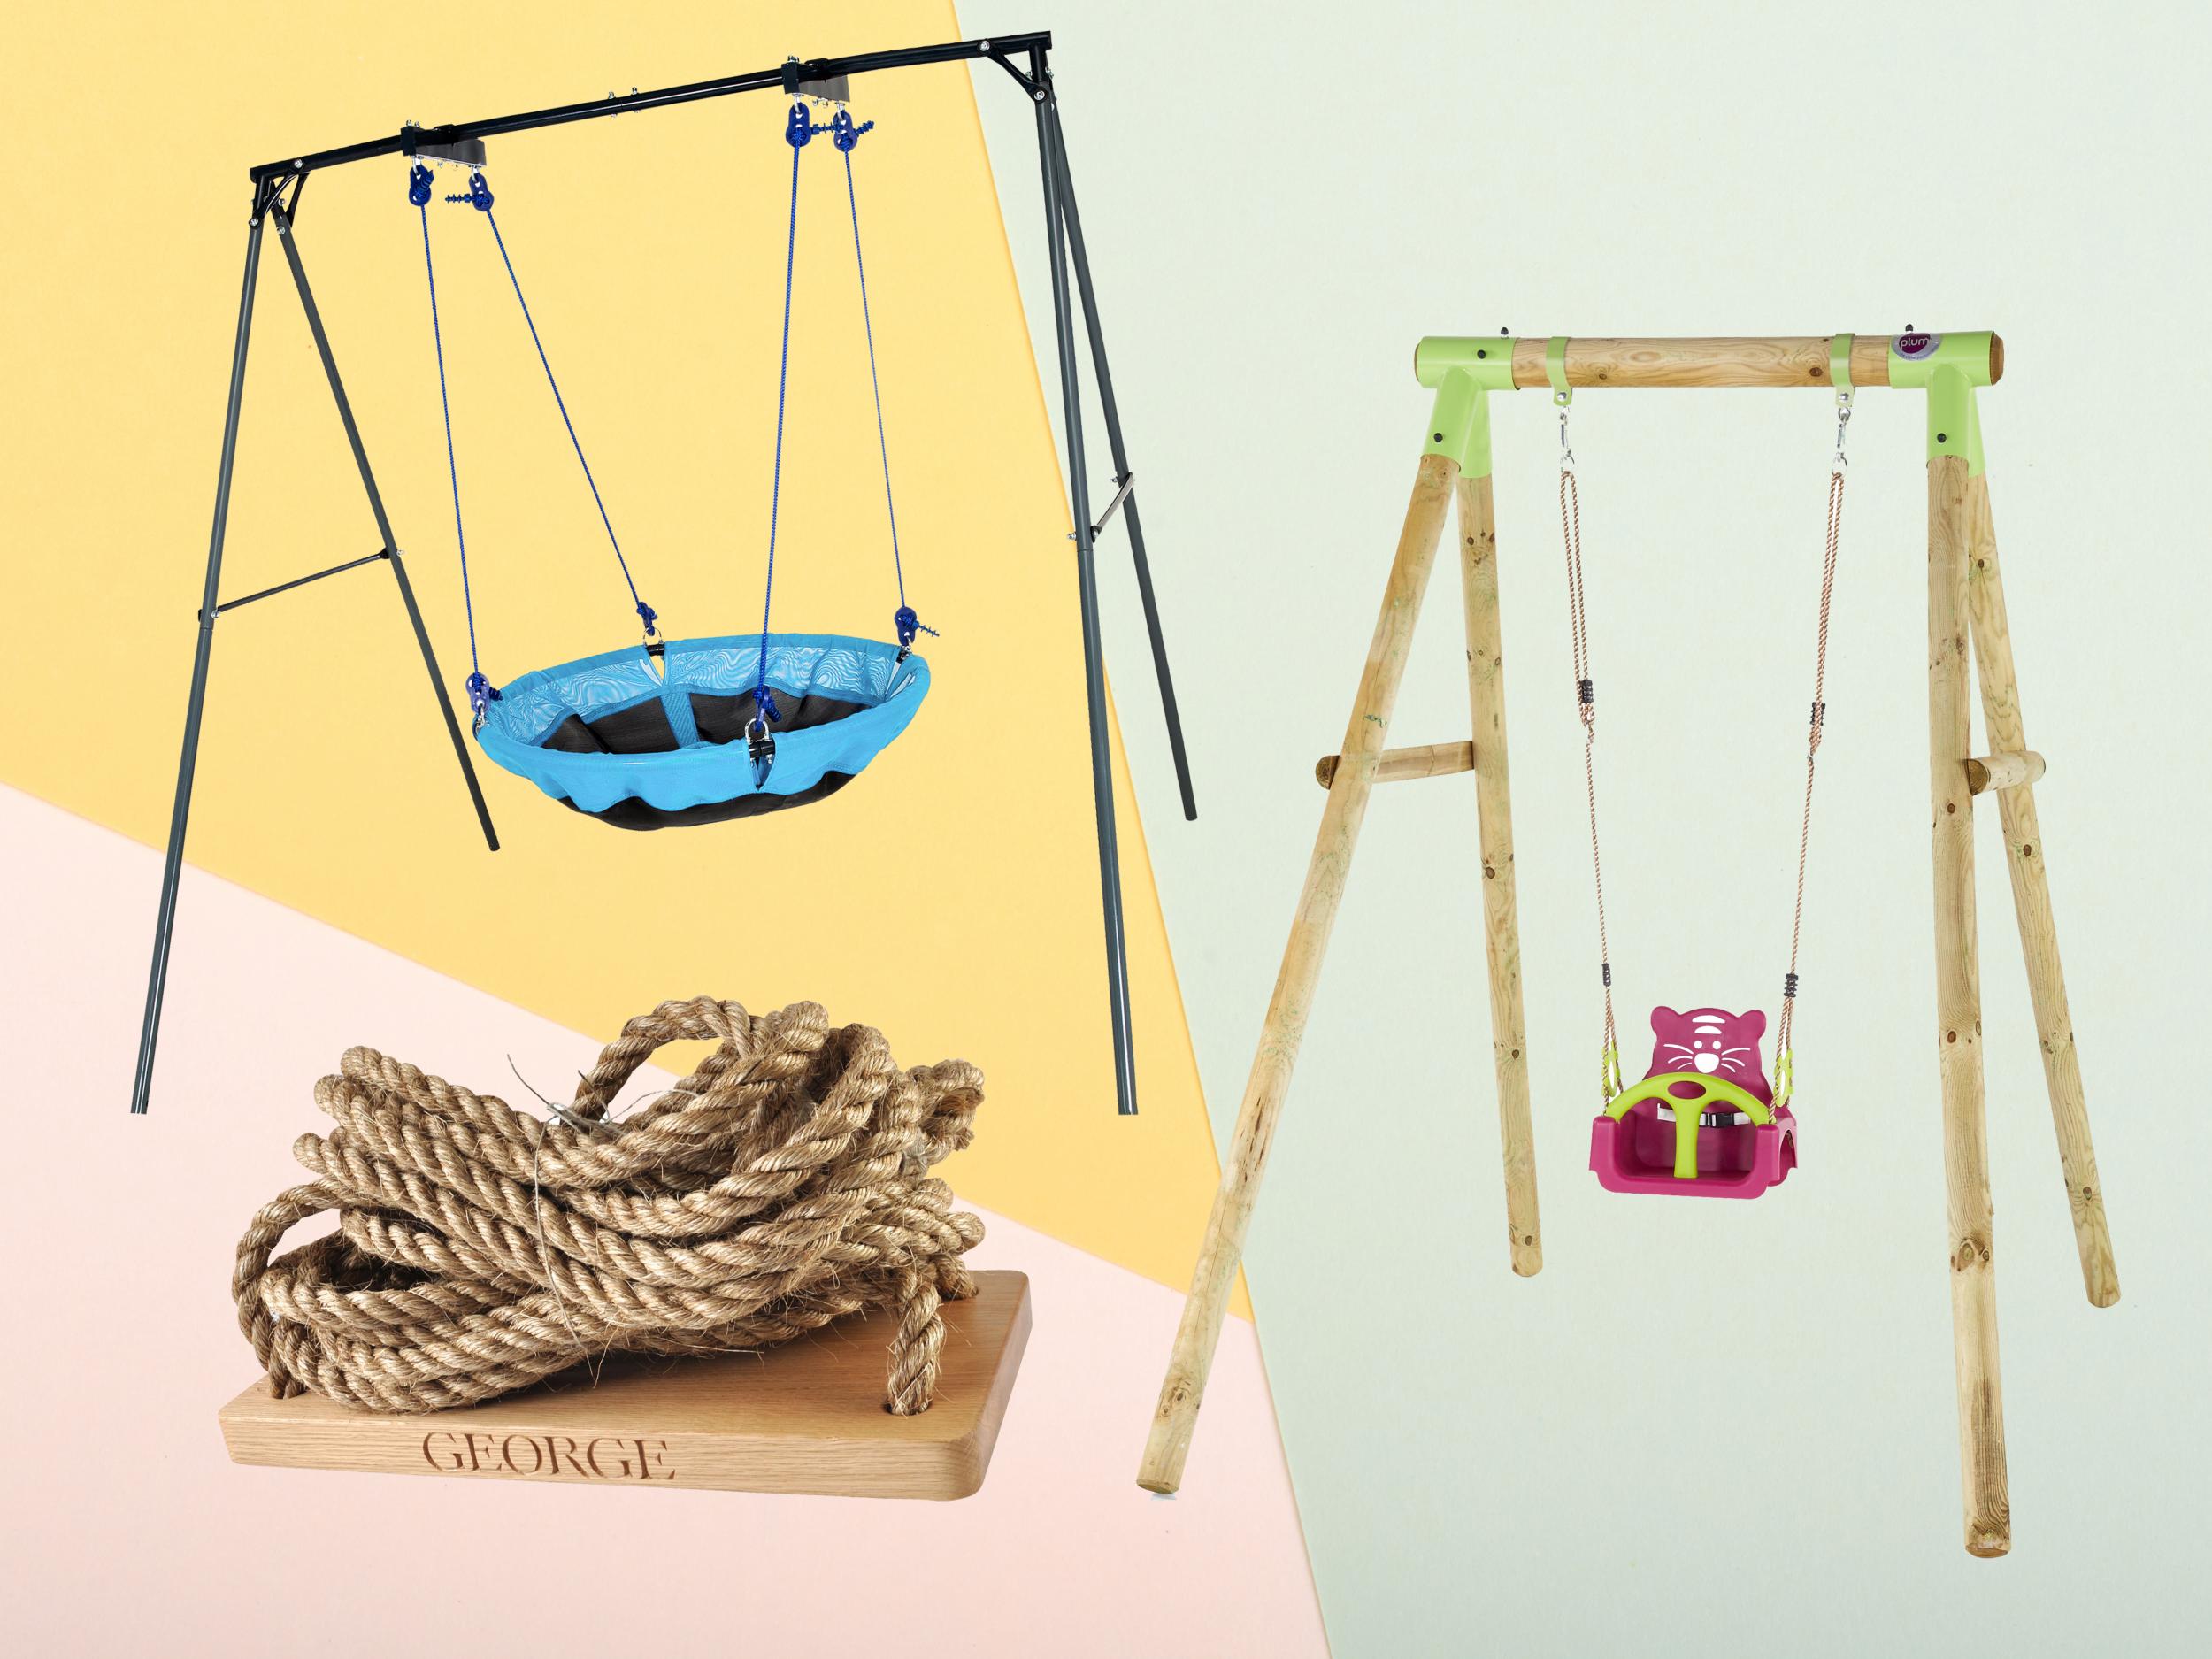 double swing set with baby seat